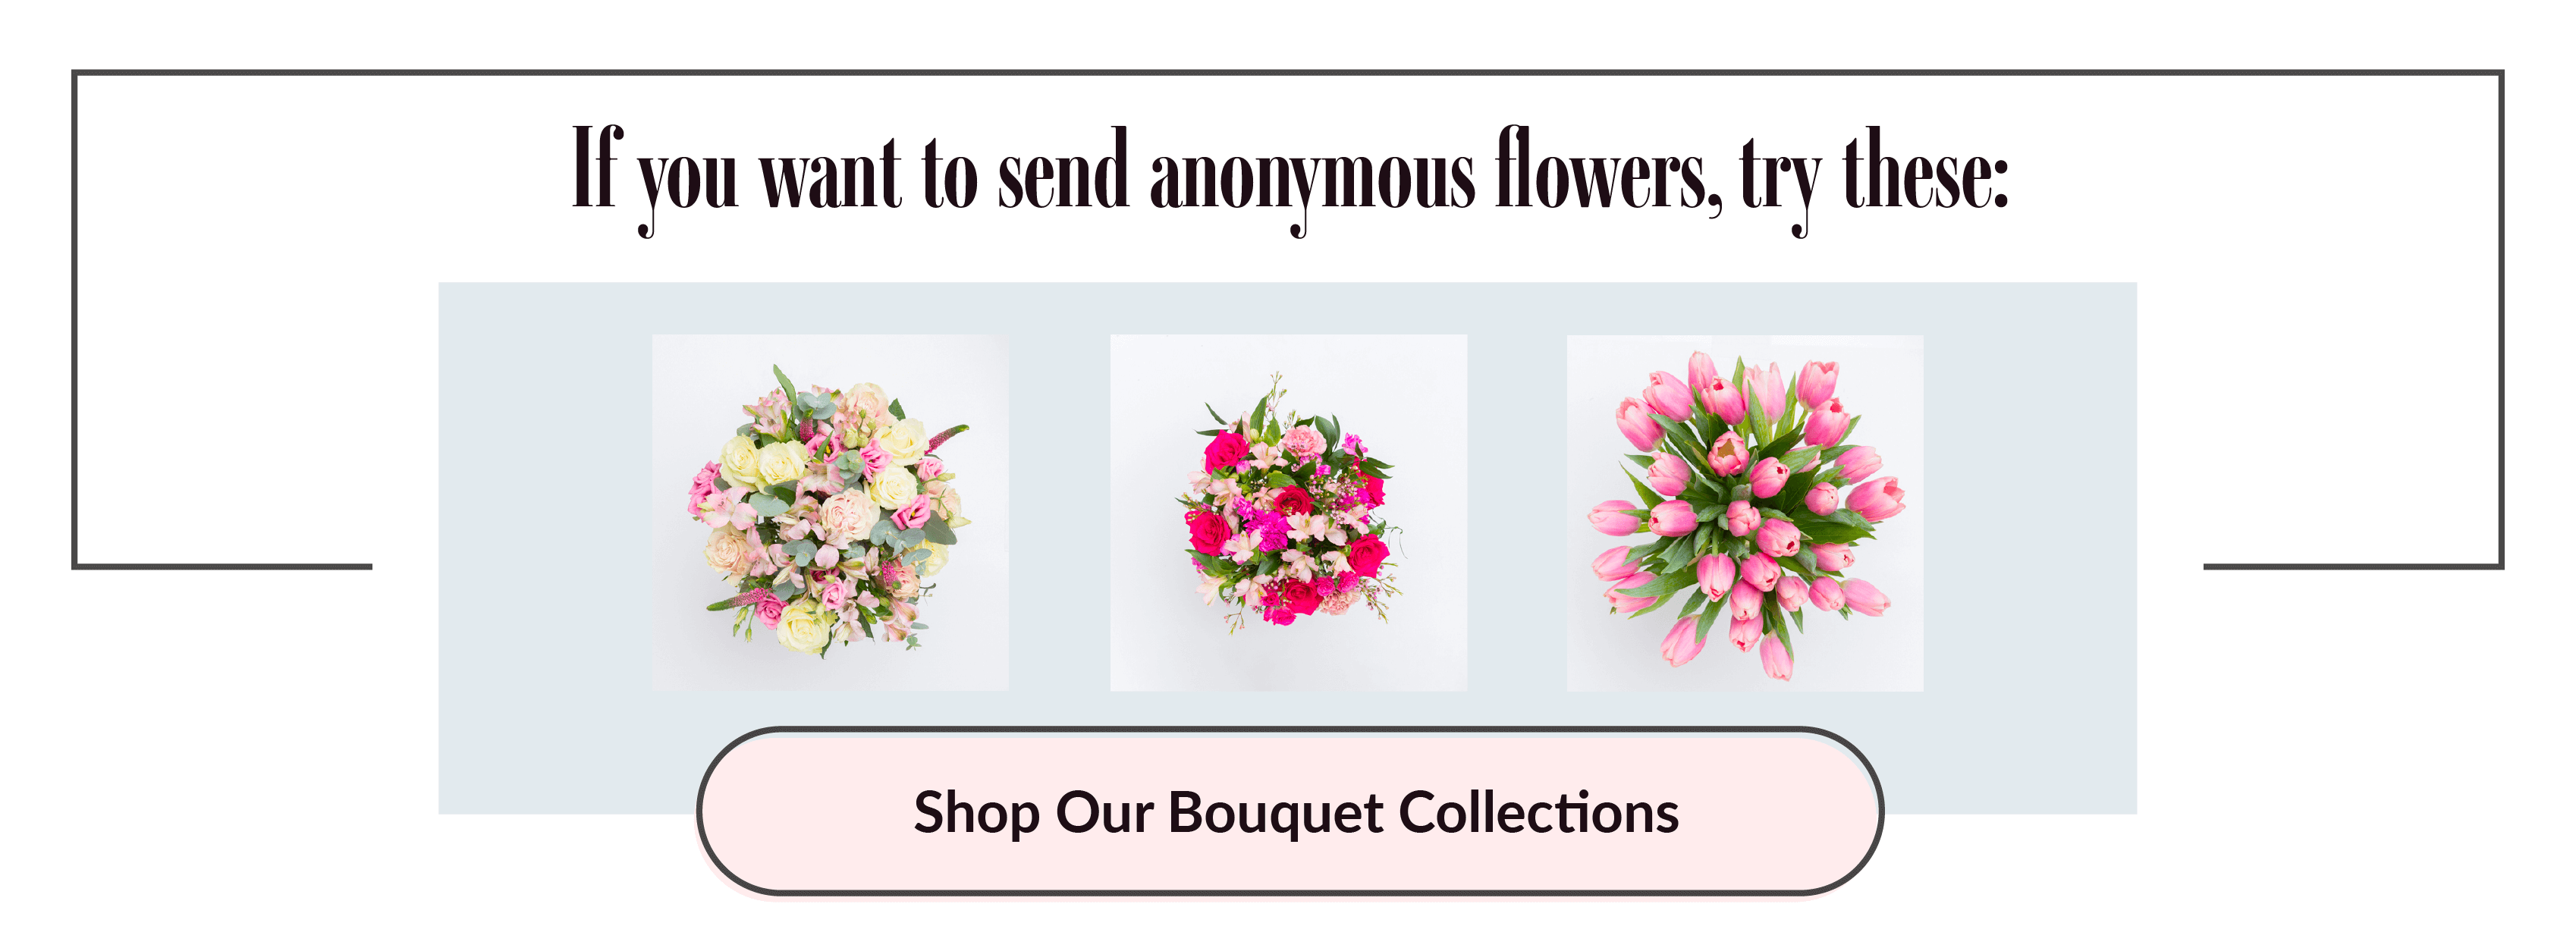 send these flowers